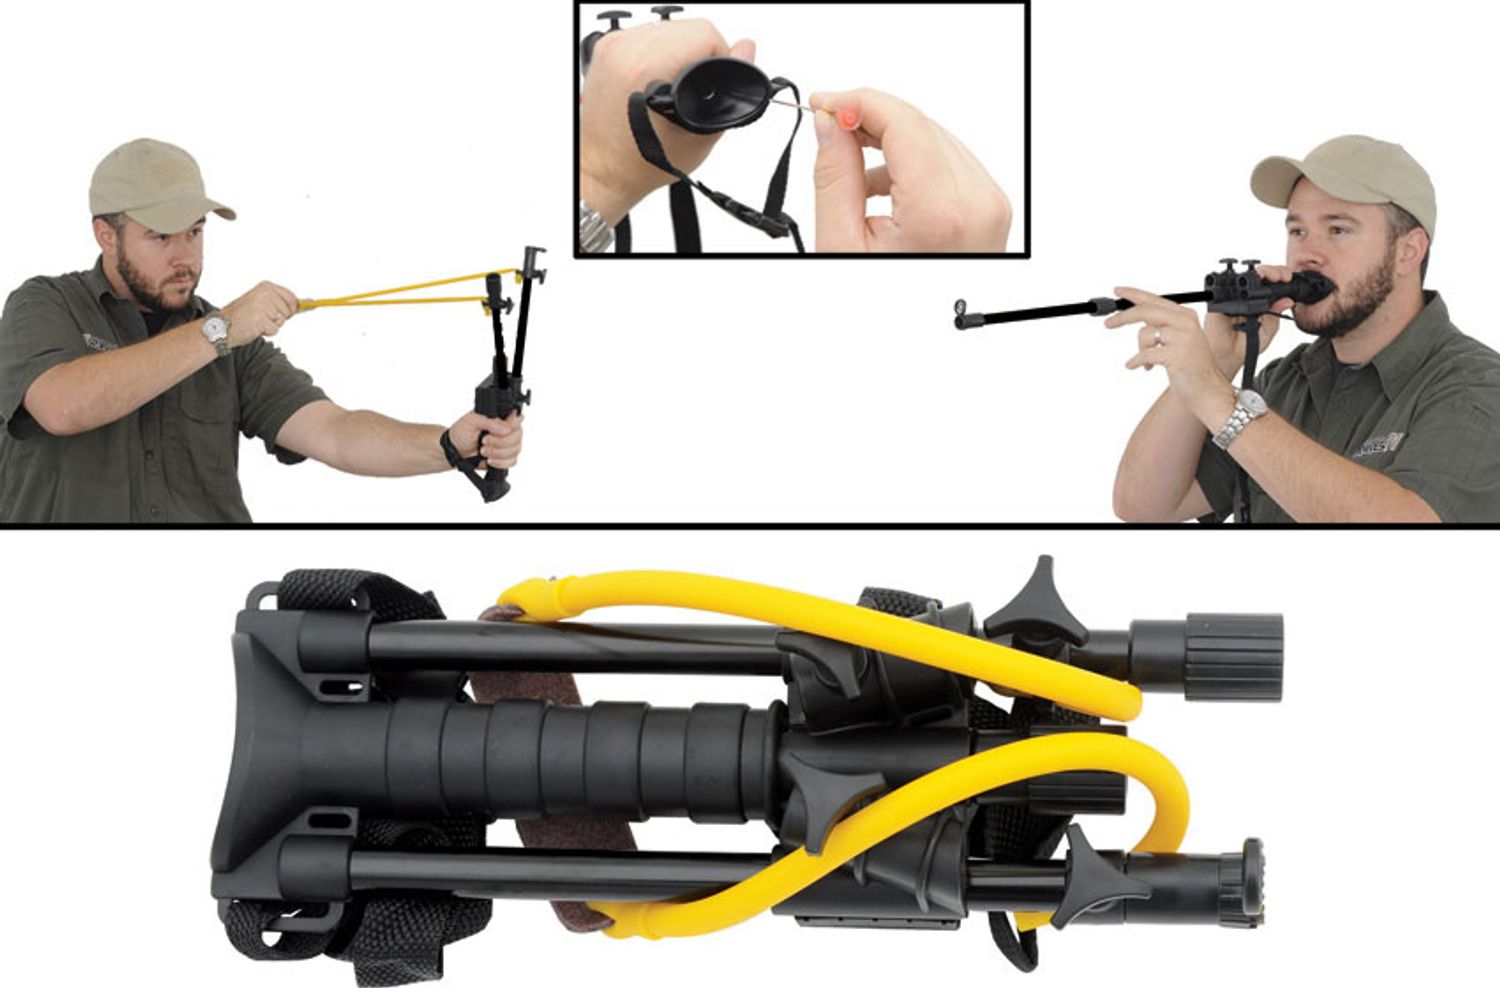 Combat Ready Blow Dart and Slingshot 2-in-1 Combo, Black - KnifeCenter -  CBR01B - Discontinued